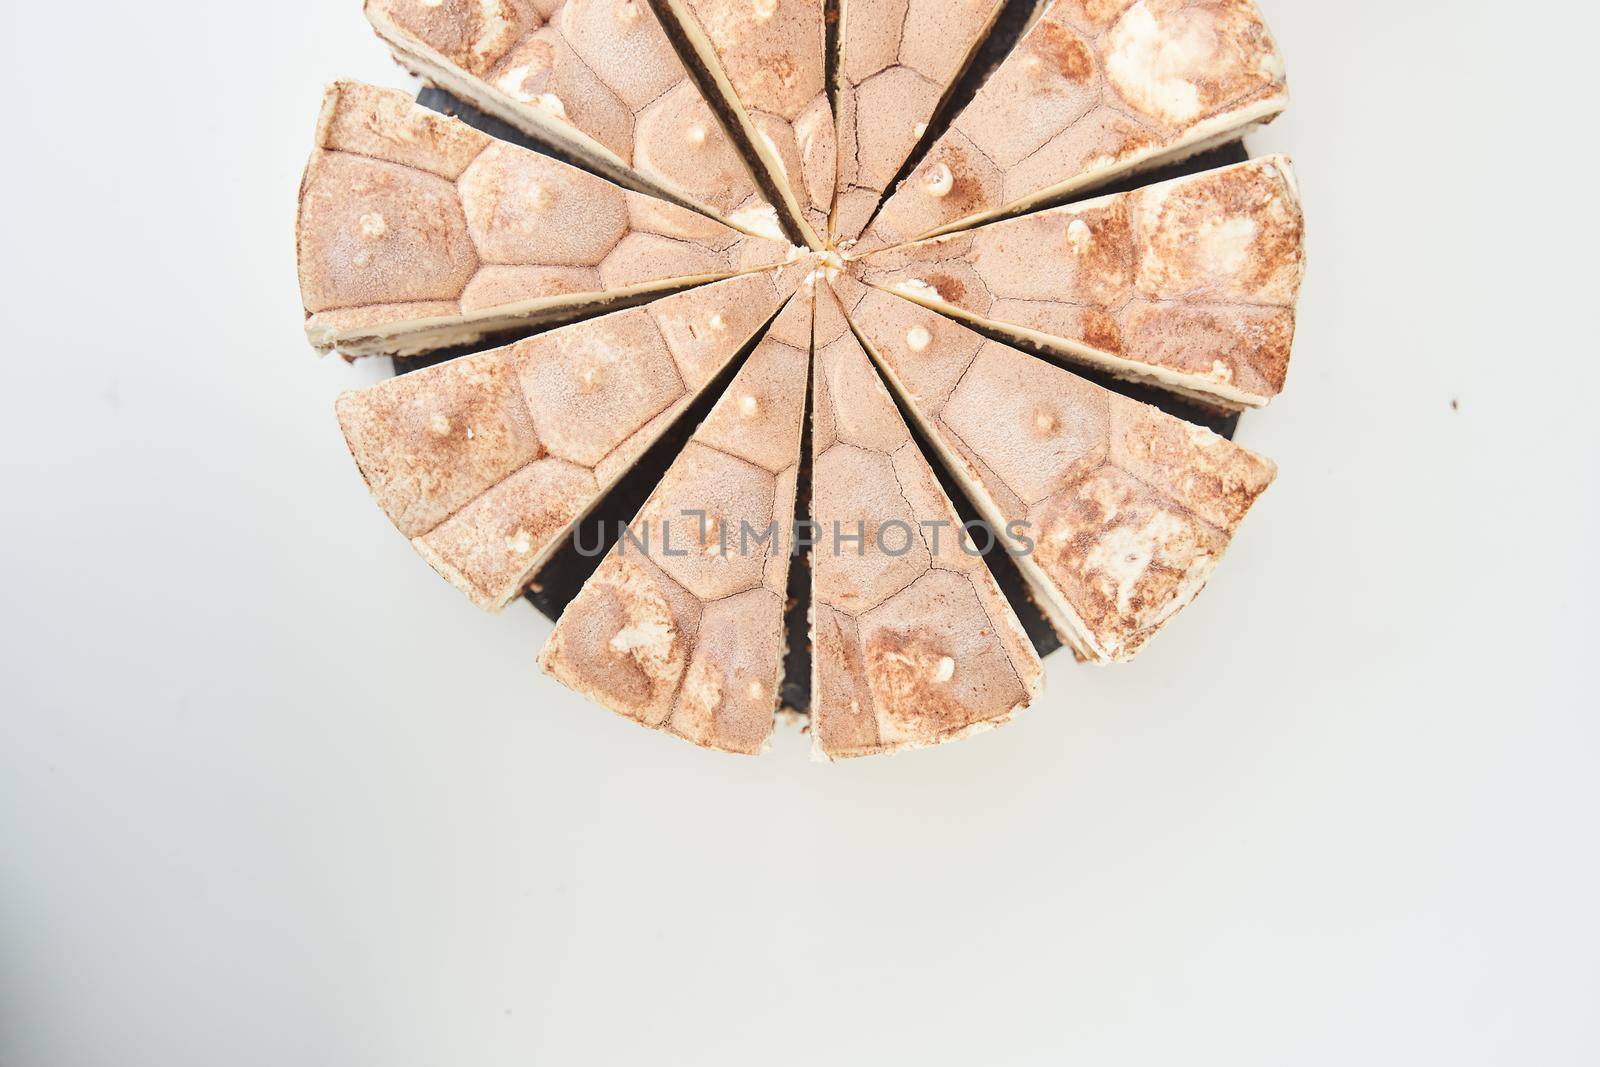 Cake top view on a white background. High quality photo